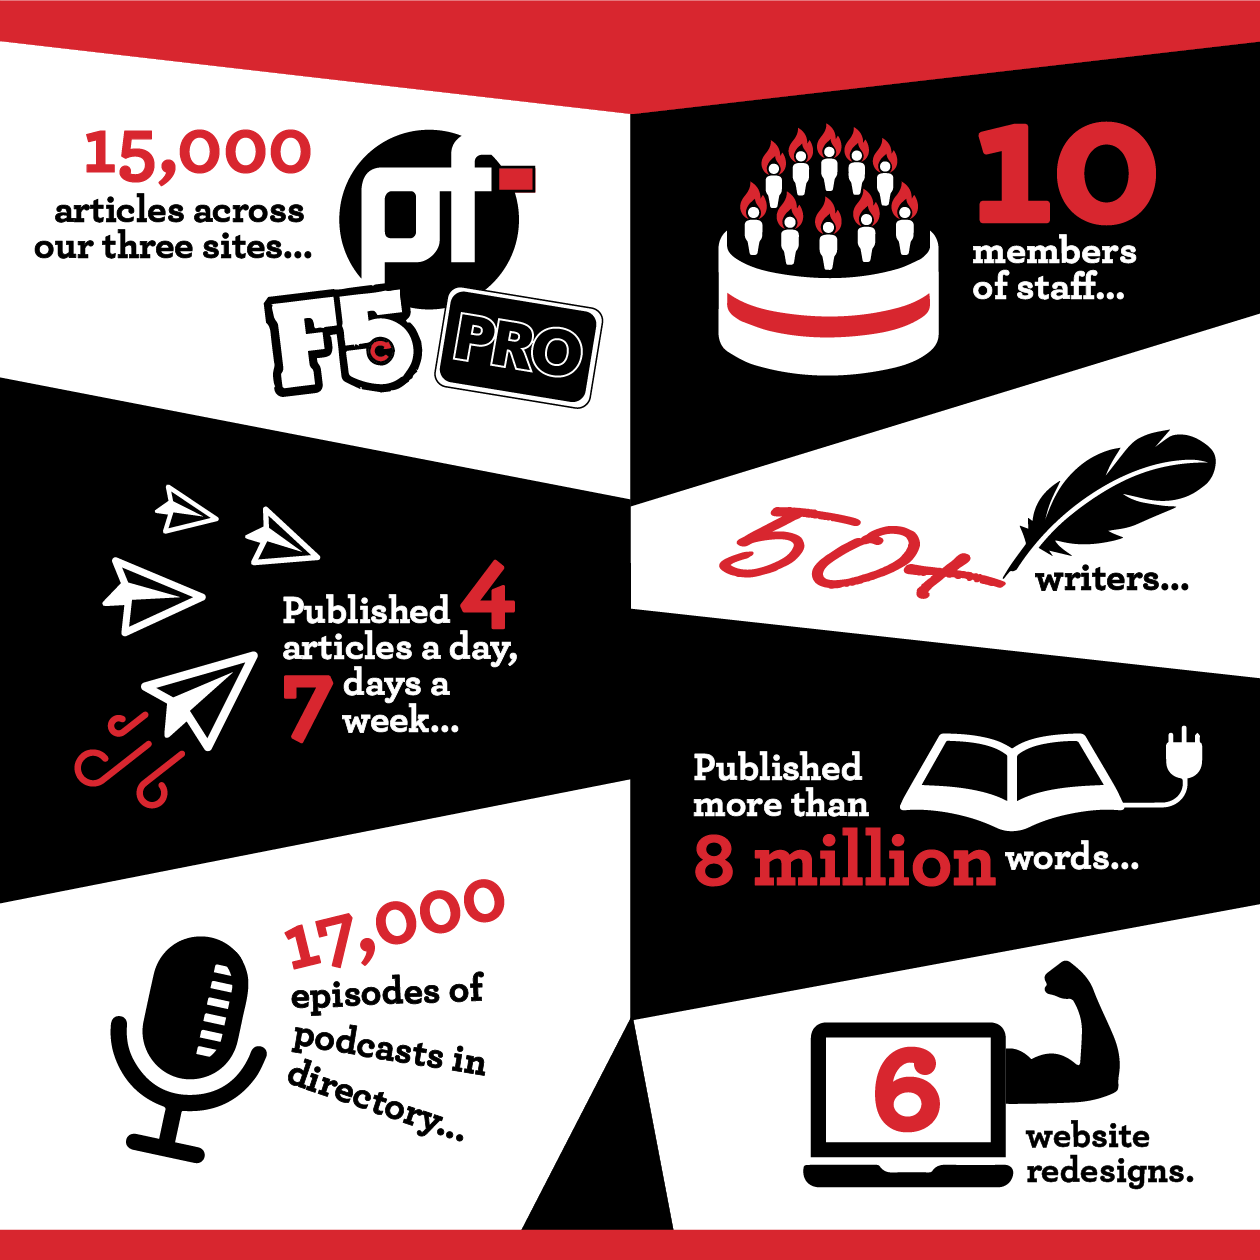 Pokerfuse is Ten Years Old! You know what that means: It's infographic time